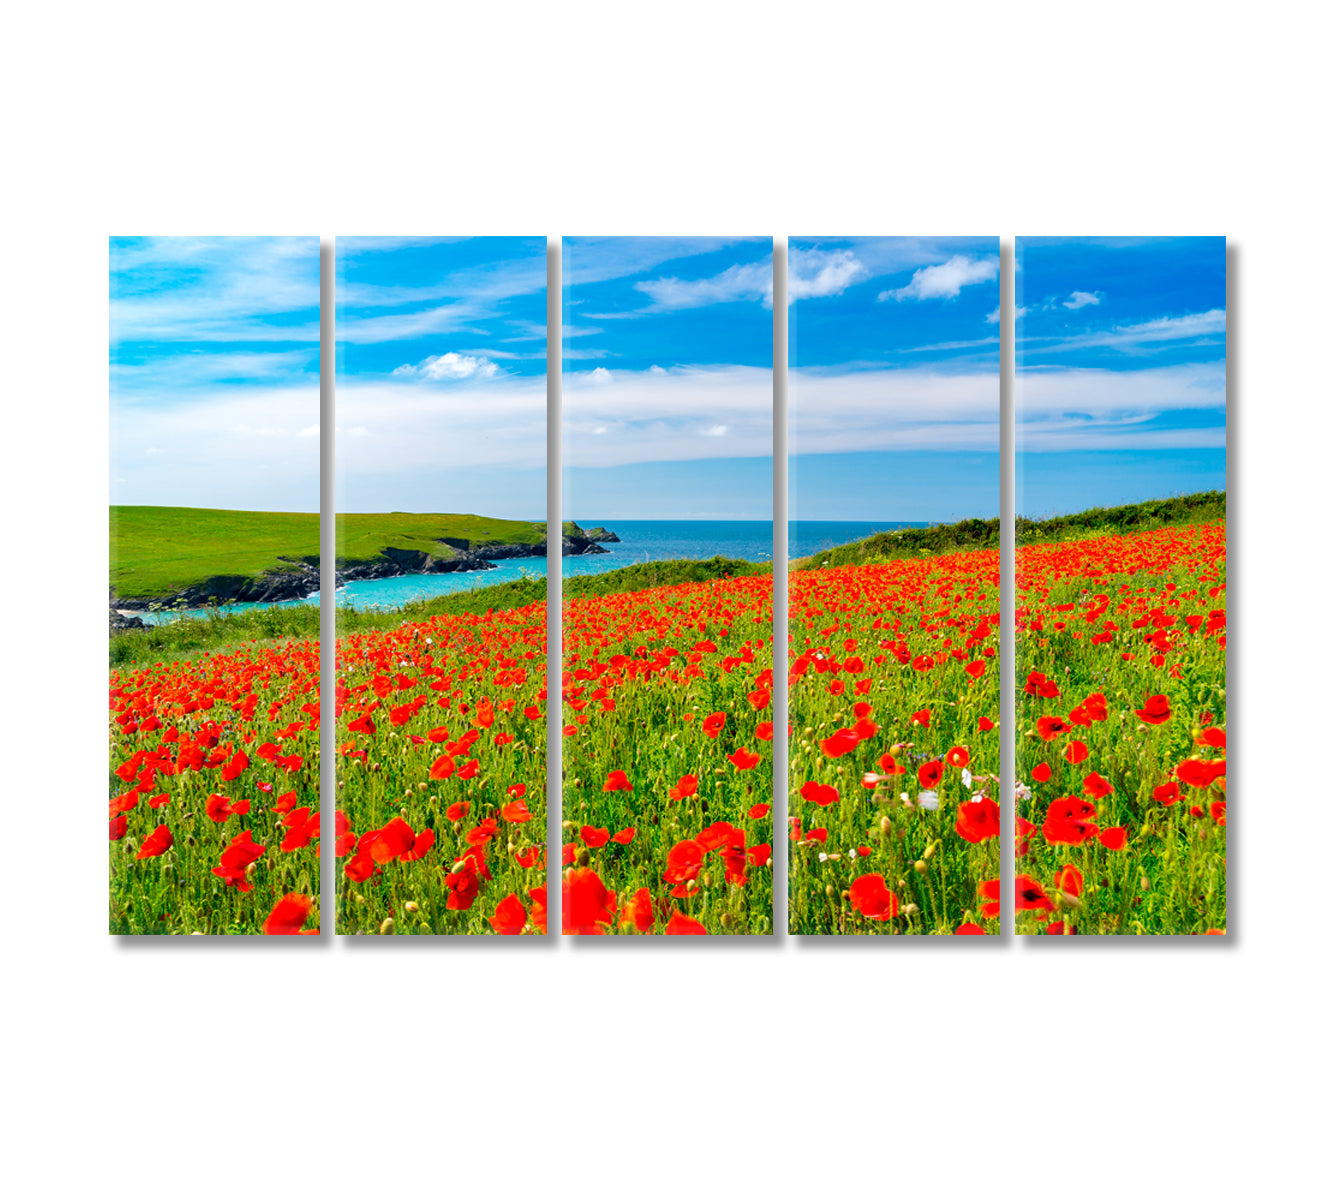 Wildflowers Field with Poppies Canvas Print-Canvas Print-CetArt-5 Panels-36x24 inches-CetArt